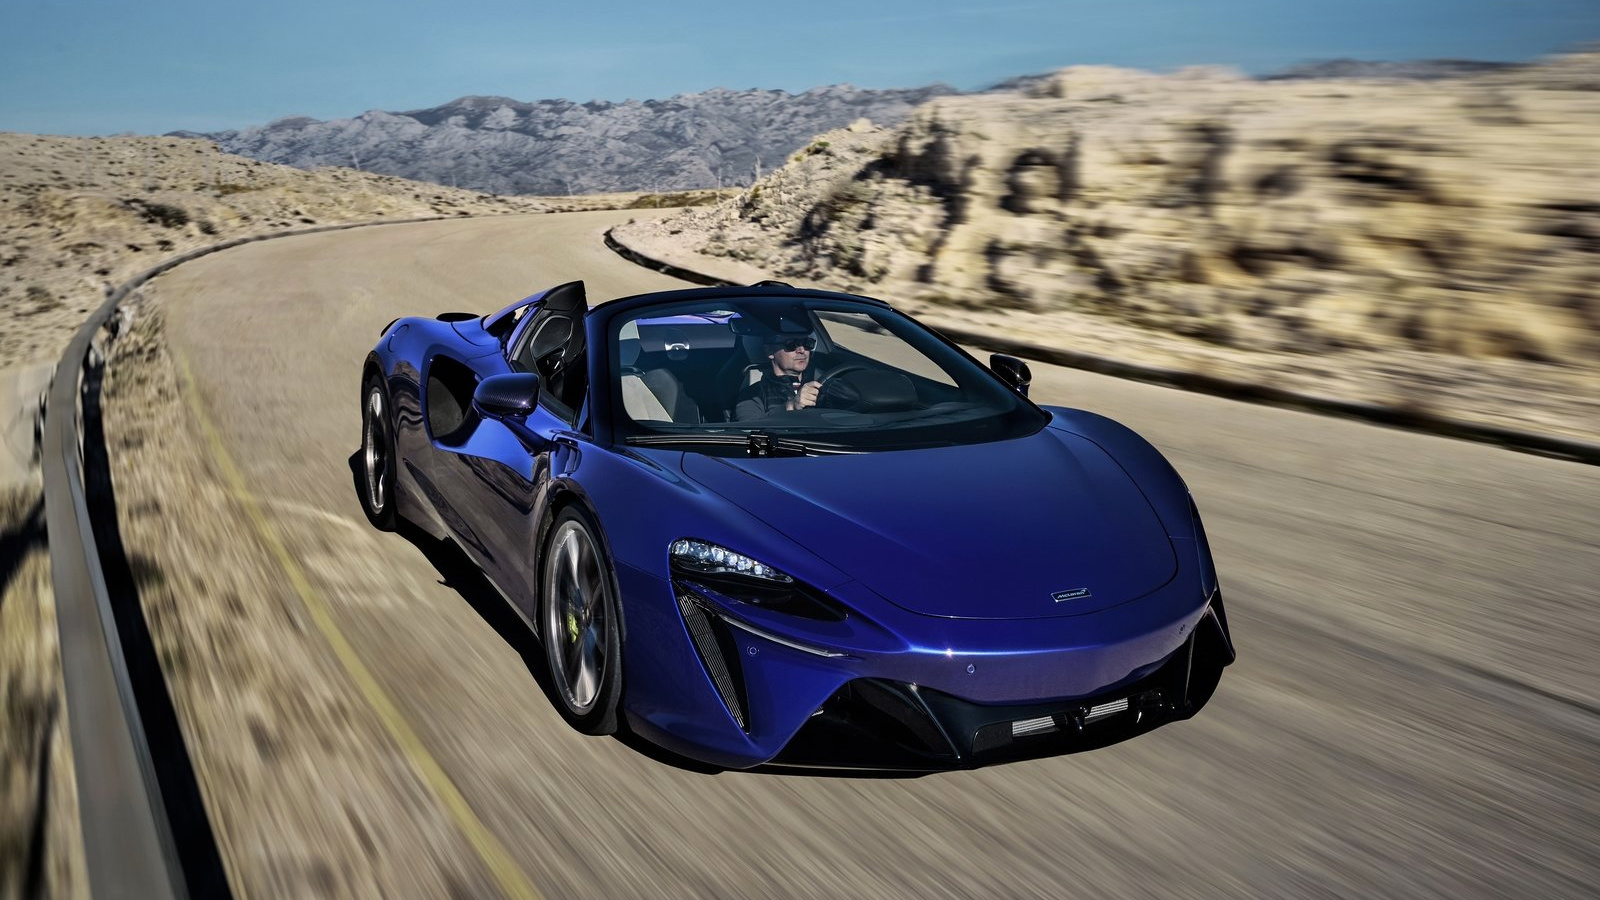 New McLaren Artura Spider Launched In The UAE: Here Are All The Details